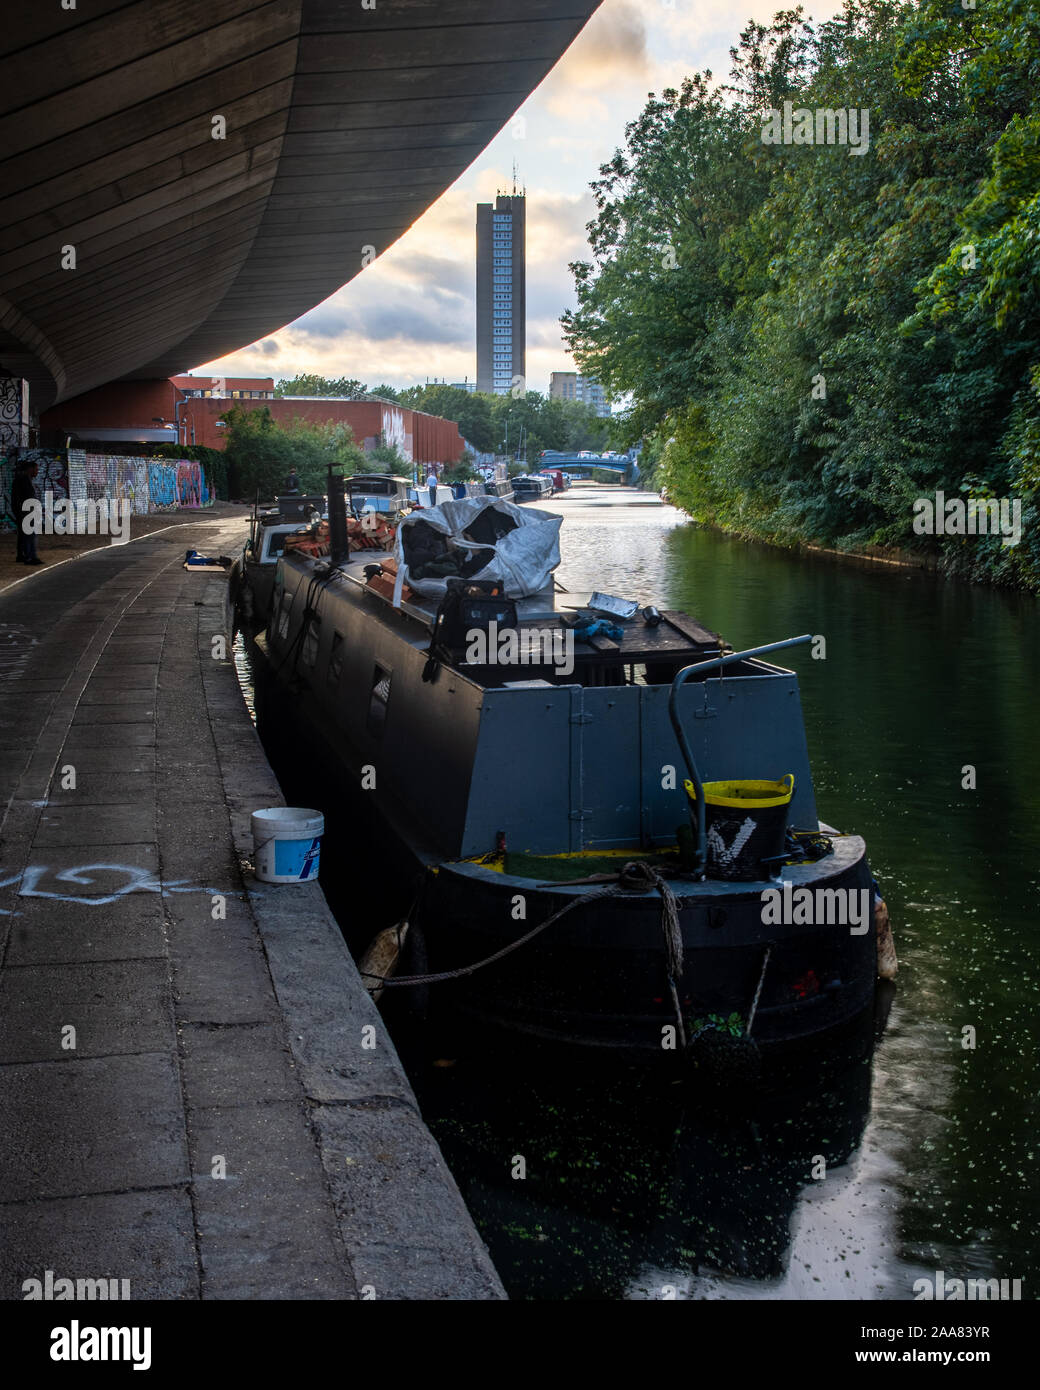 London, England, UK - September 12, 2019: Traditional narrowboats are moored on the Grand Union Canal under the Westway flyover in West London. Stock Photo